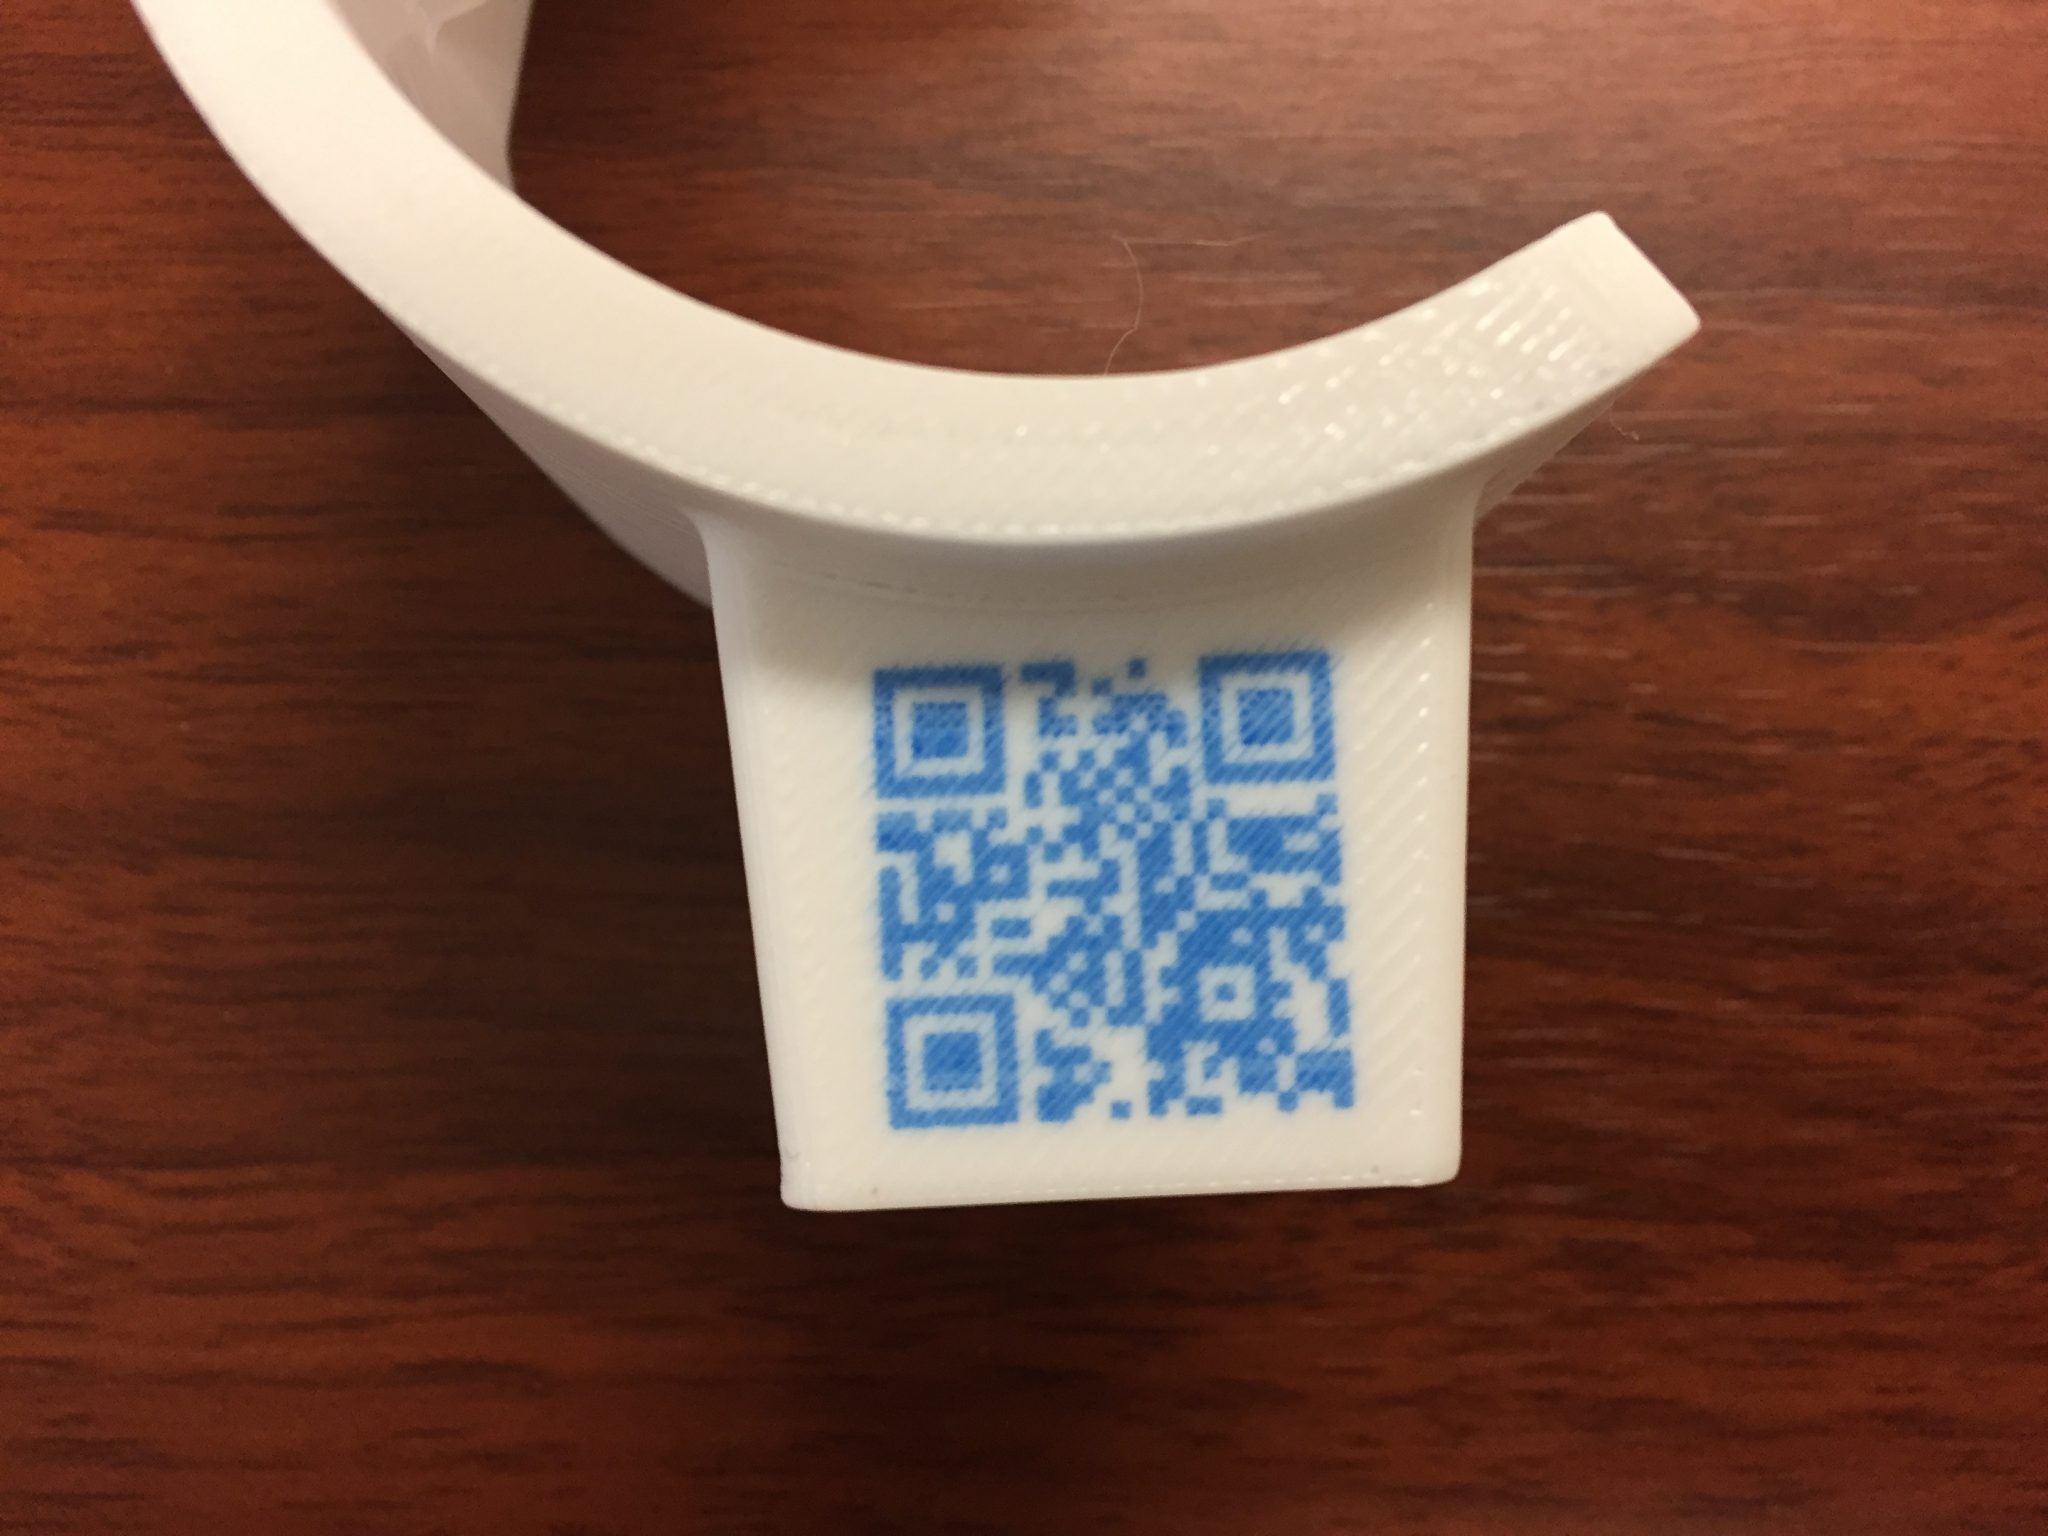 QR code embedded into a 3D printed part. Photo via Rize.